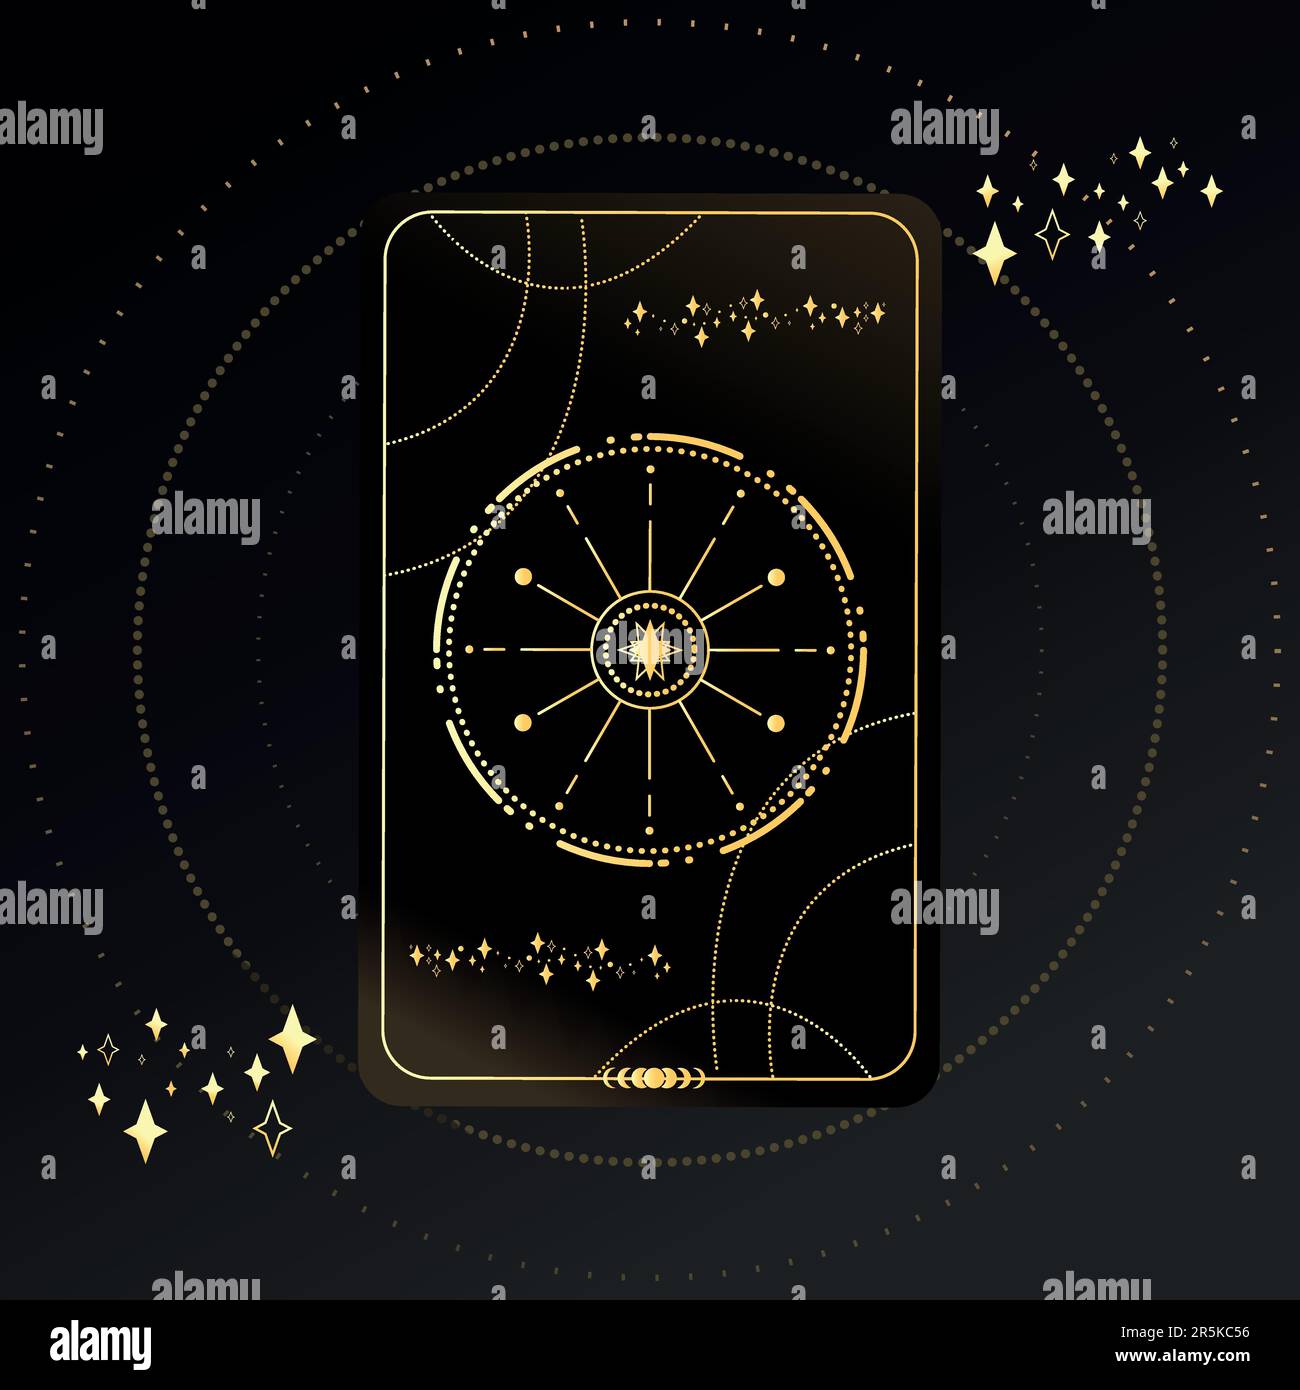 Gold Tarot card with a star on a black background with stars. Tarot symbolism. Mystery, astrology, esoteric Stock Vector